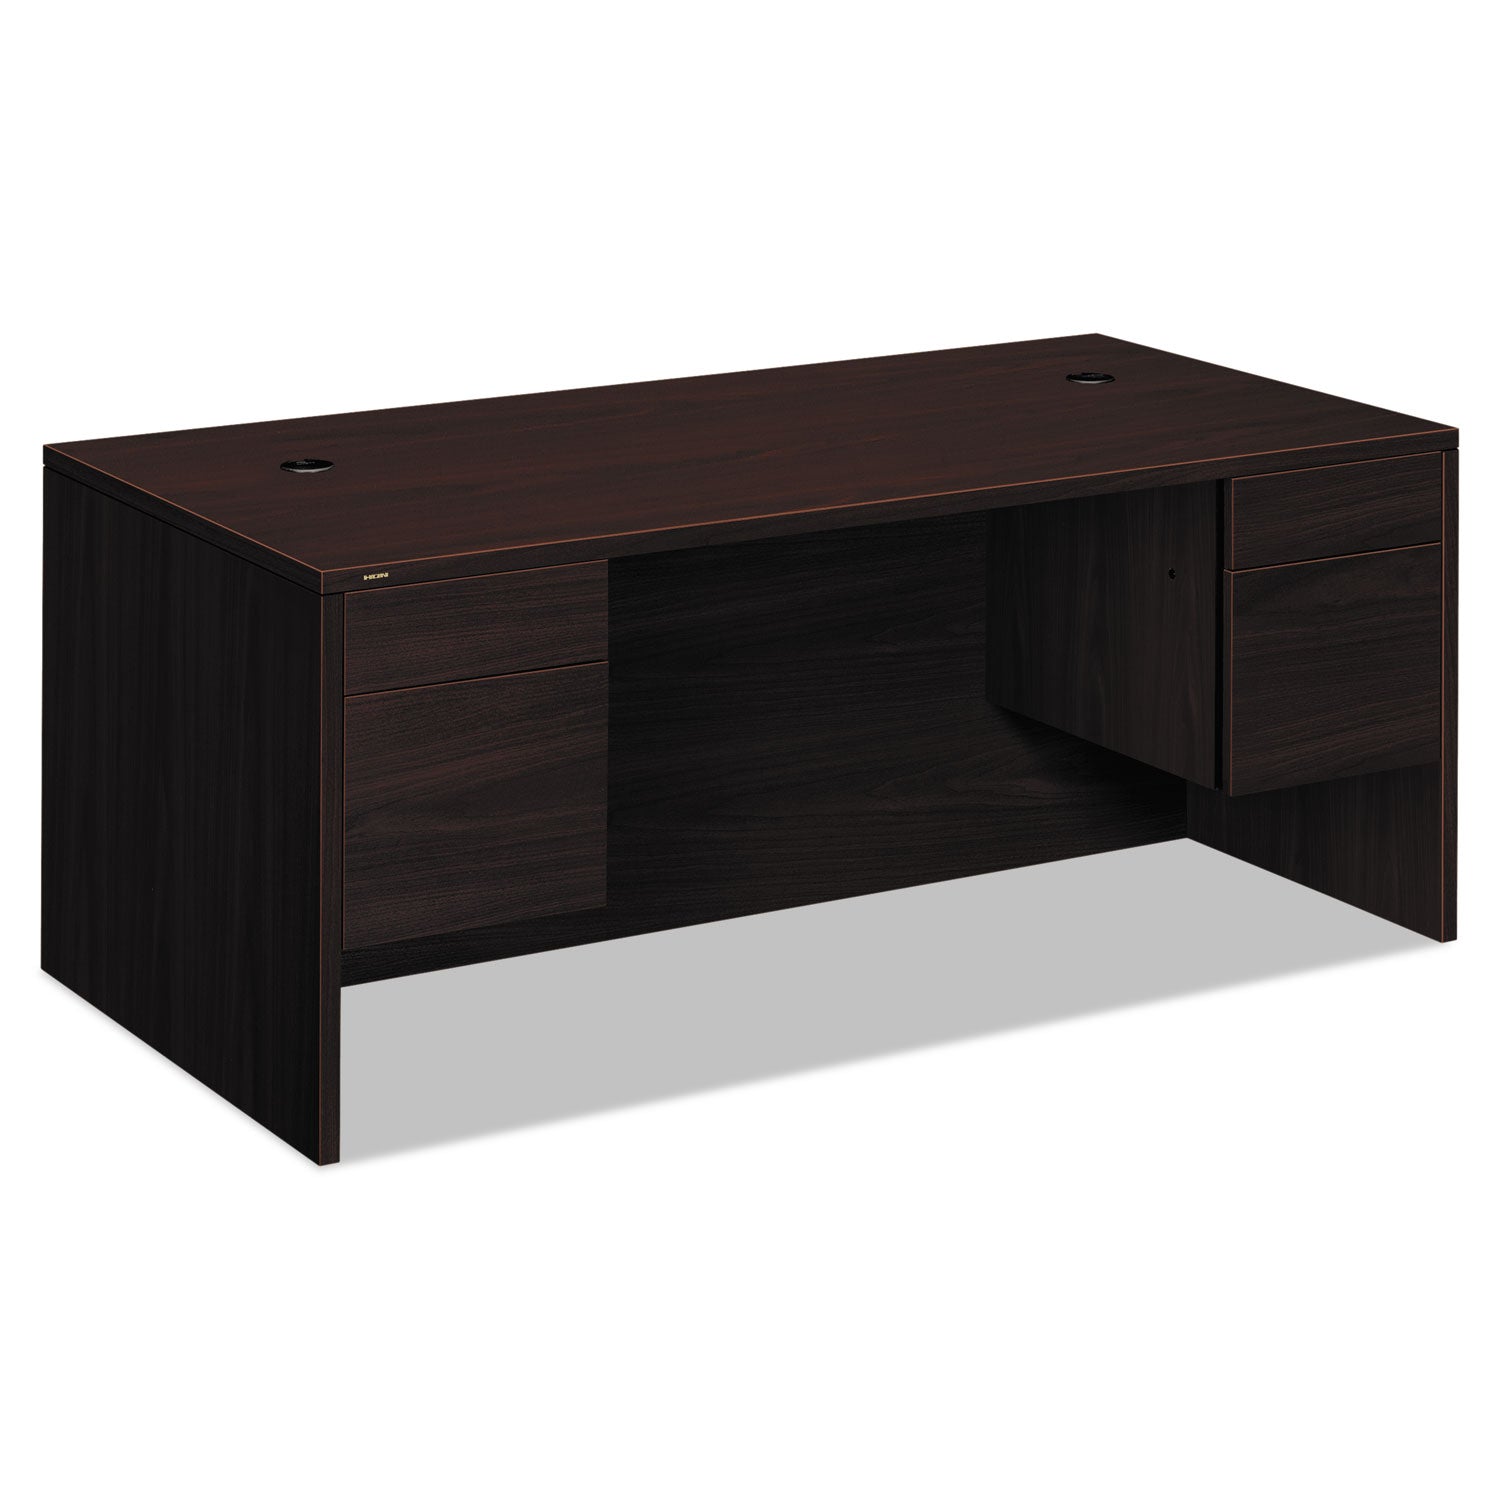 10500 Series Double 3/4-Height Pedestal Desk, Left and Right: Box/File, 72" x 36" x 29.5", Mahogany - 